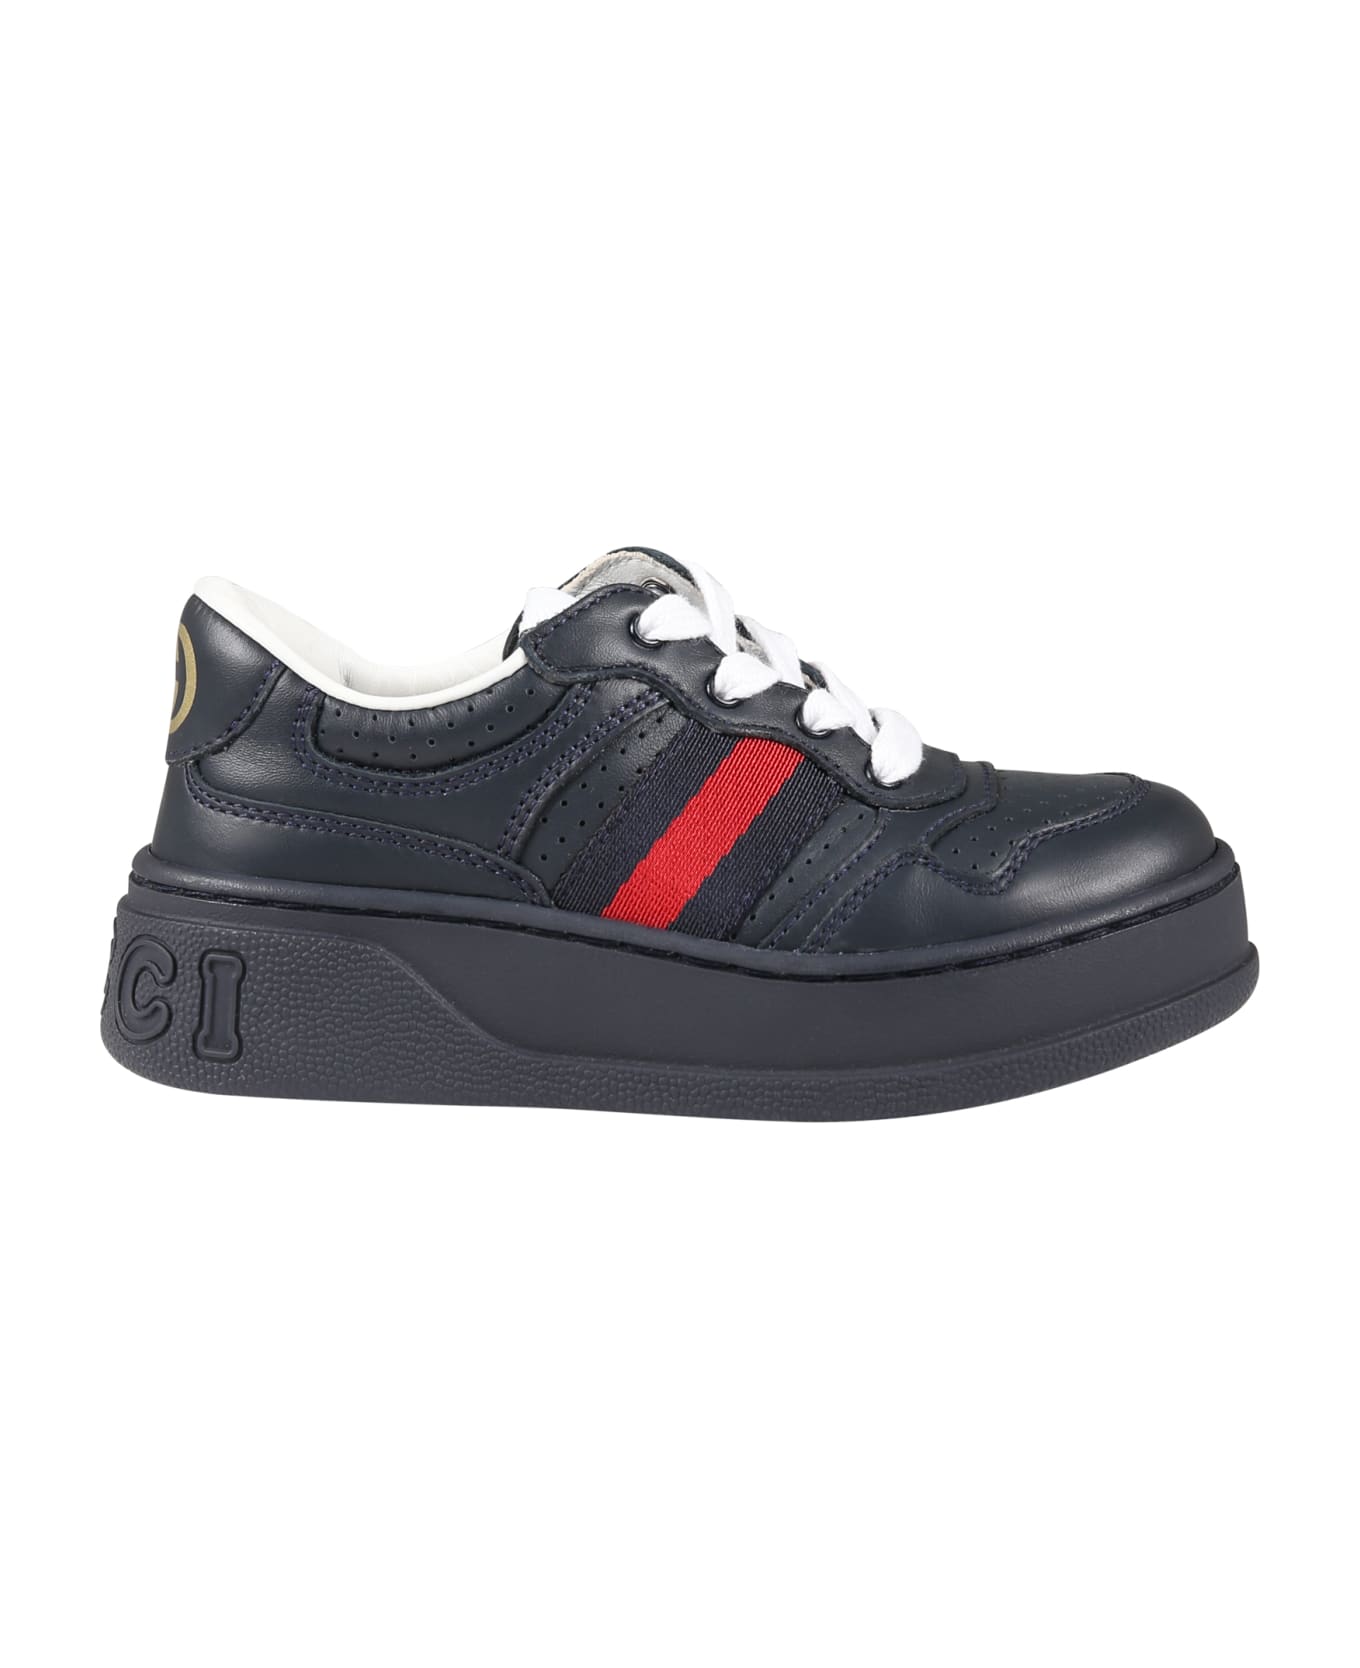 Gucci Blue Sneakers For Boy With Web - Blue シューズ